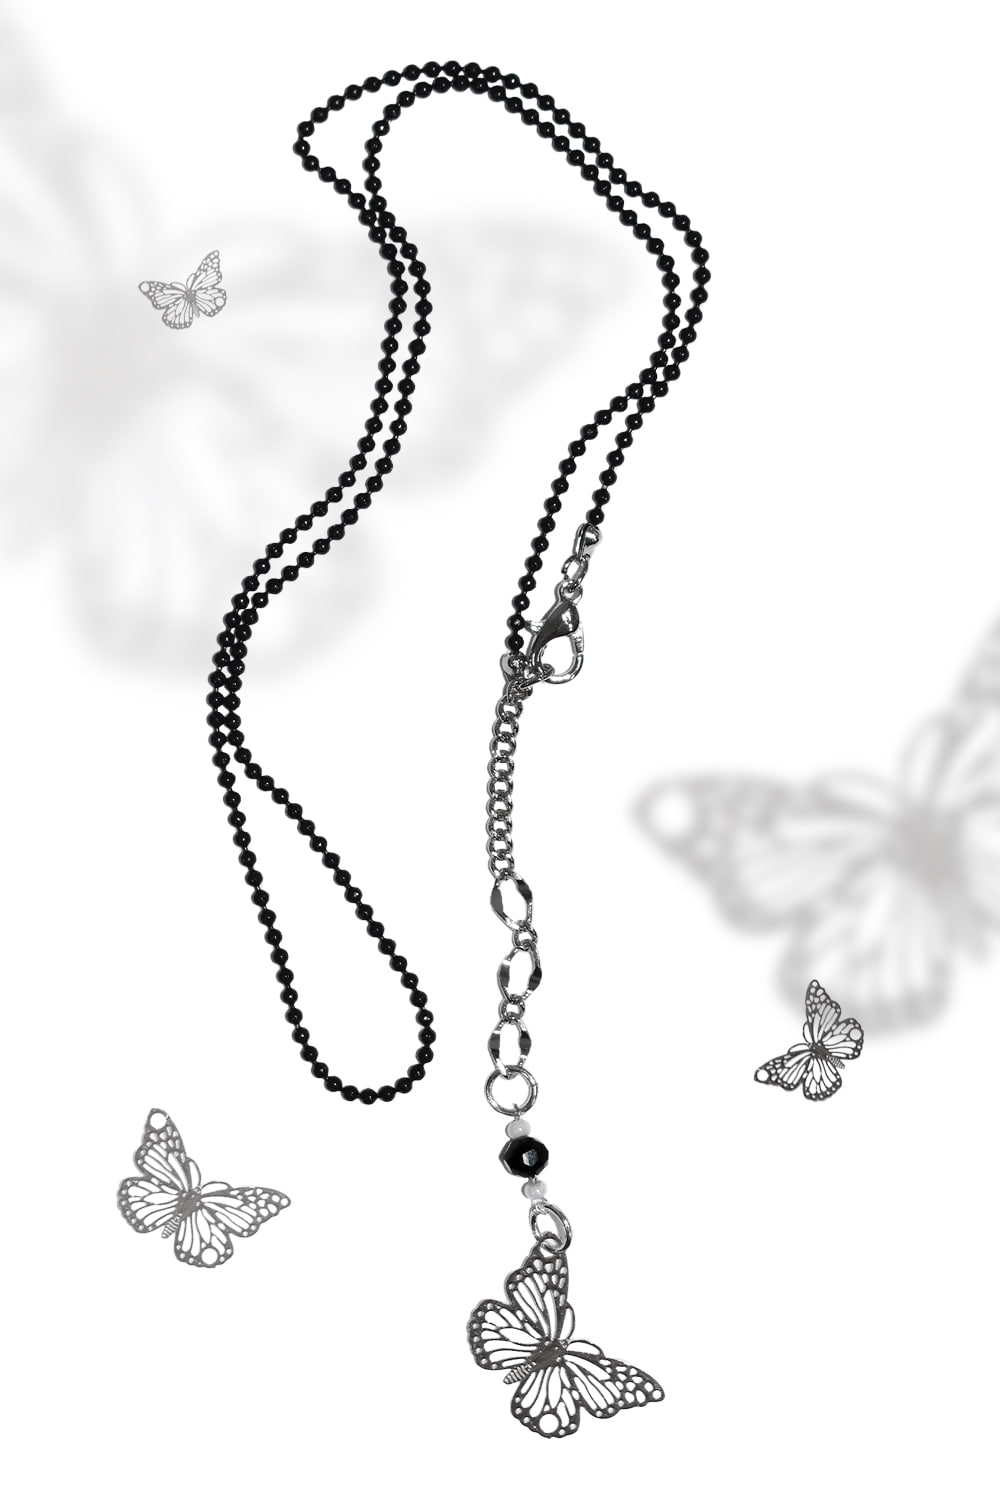 butterfly beads necklace